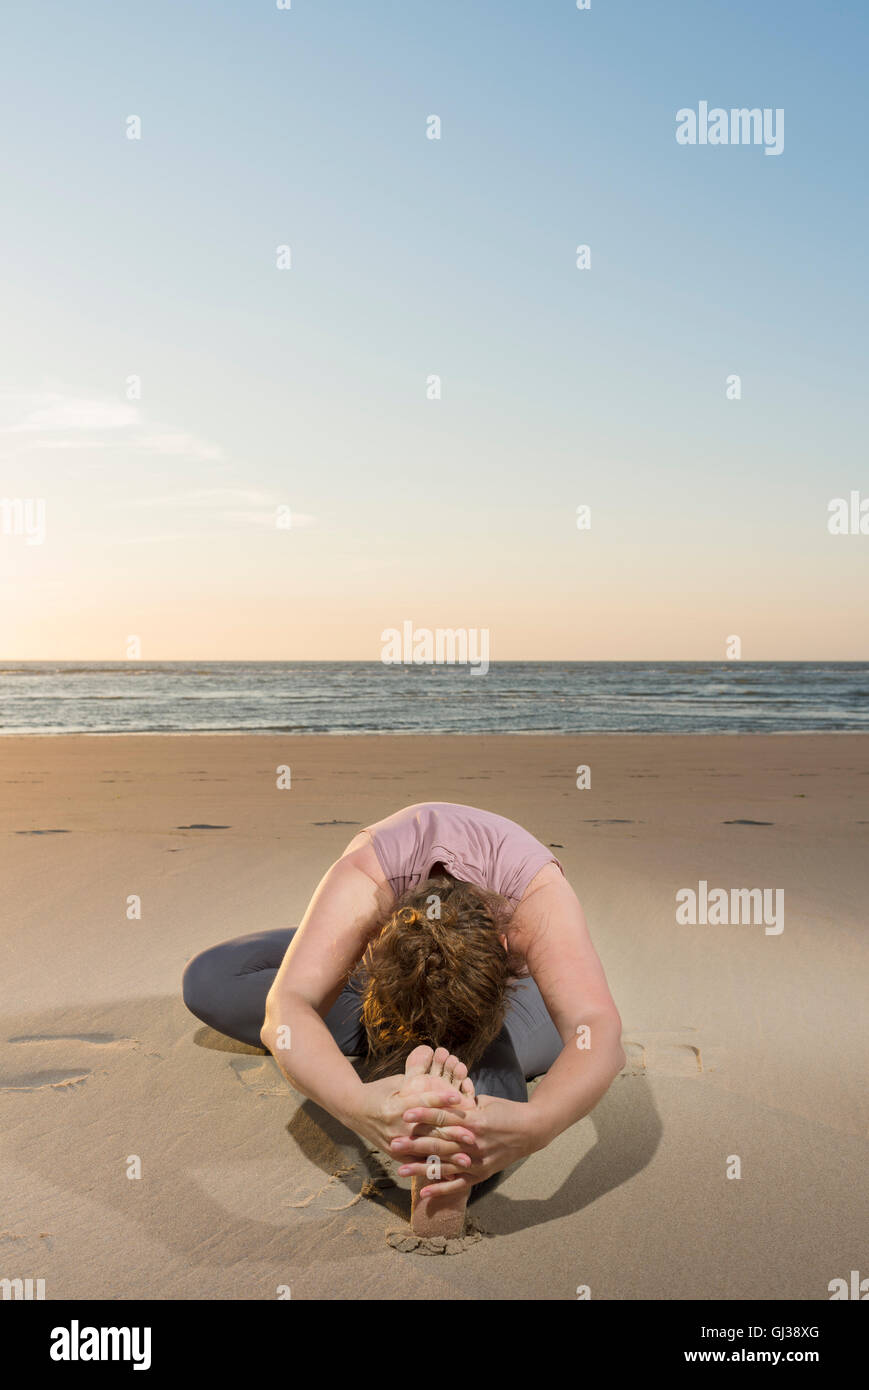 Mature woman practising yoga on a beach at sunset, touching toes Stock Photo